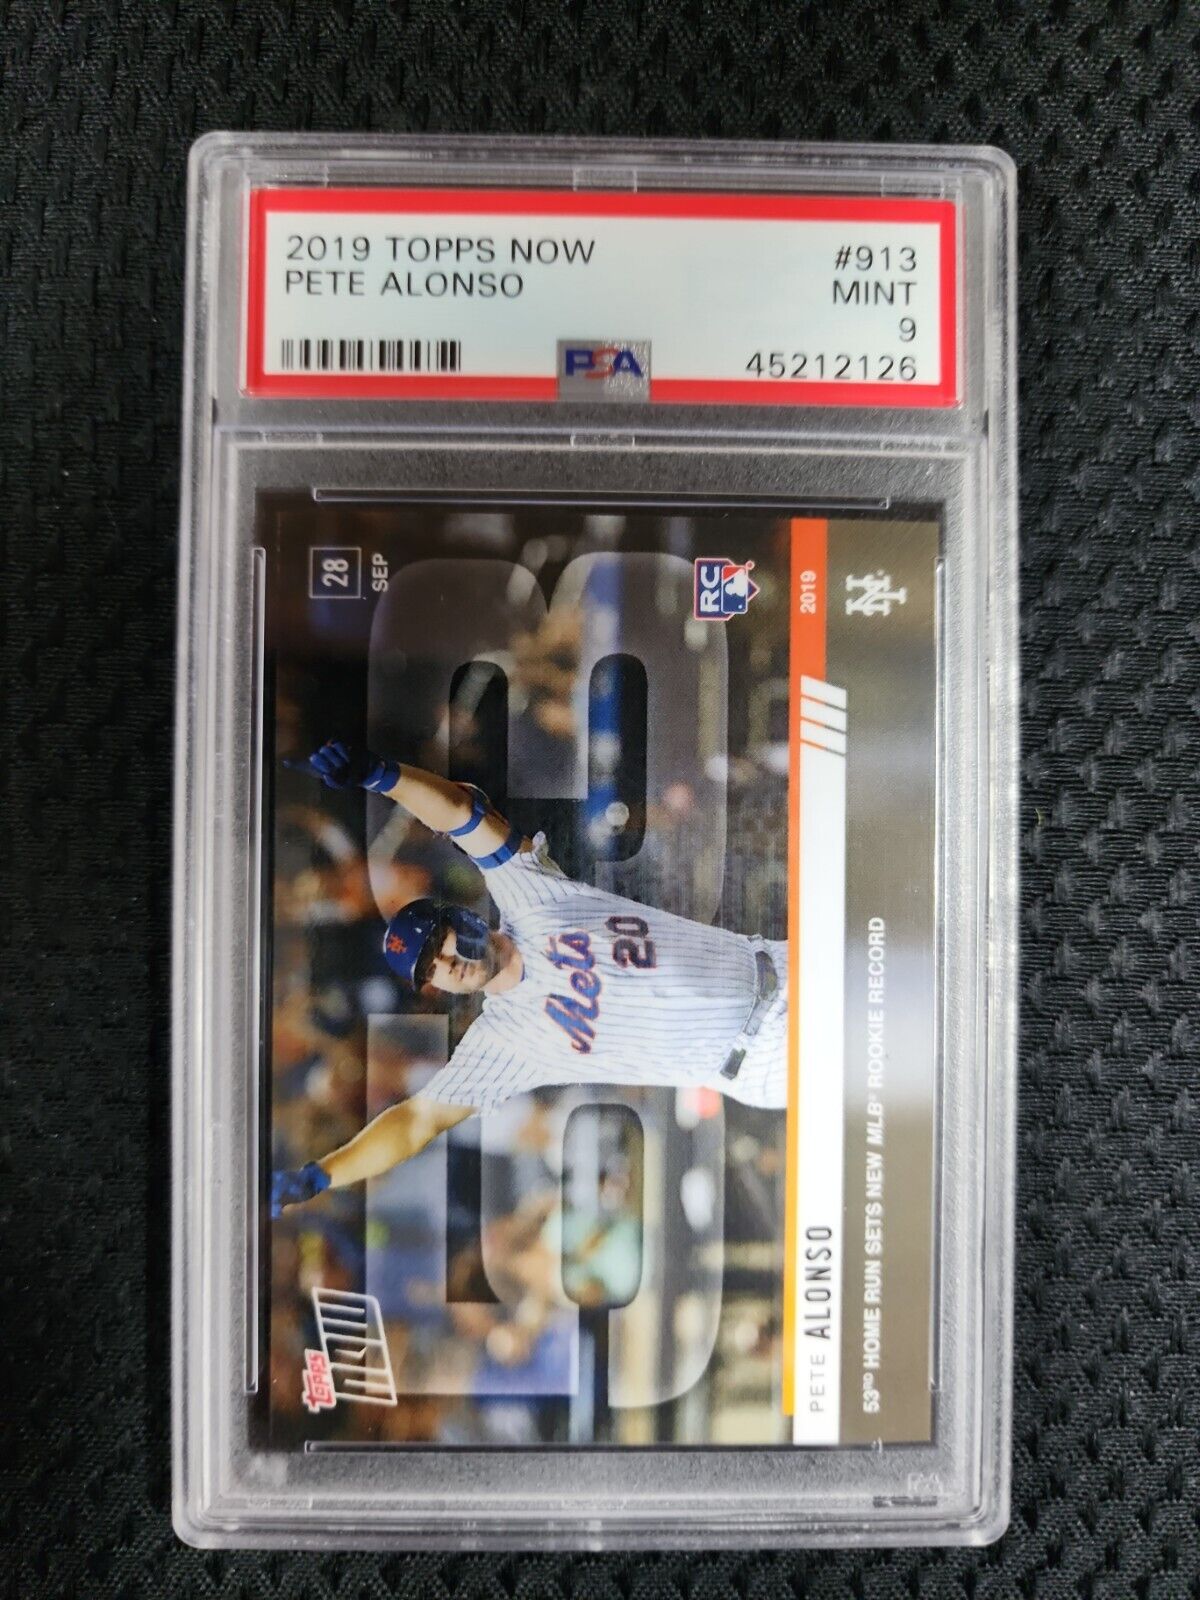 2019 Topps Now #913 Pete Alonso PSA 10 Gem Mint RC Rookie Card